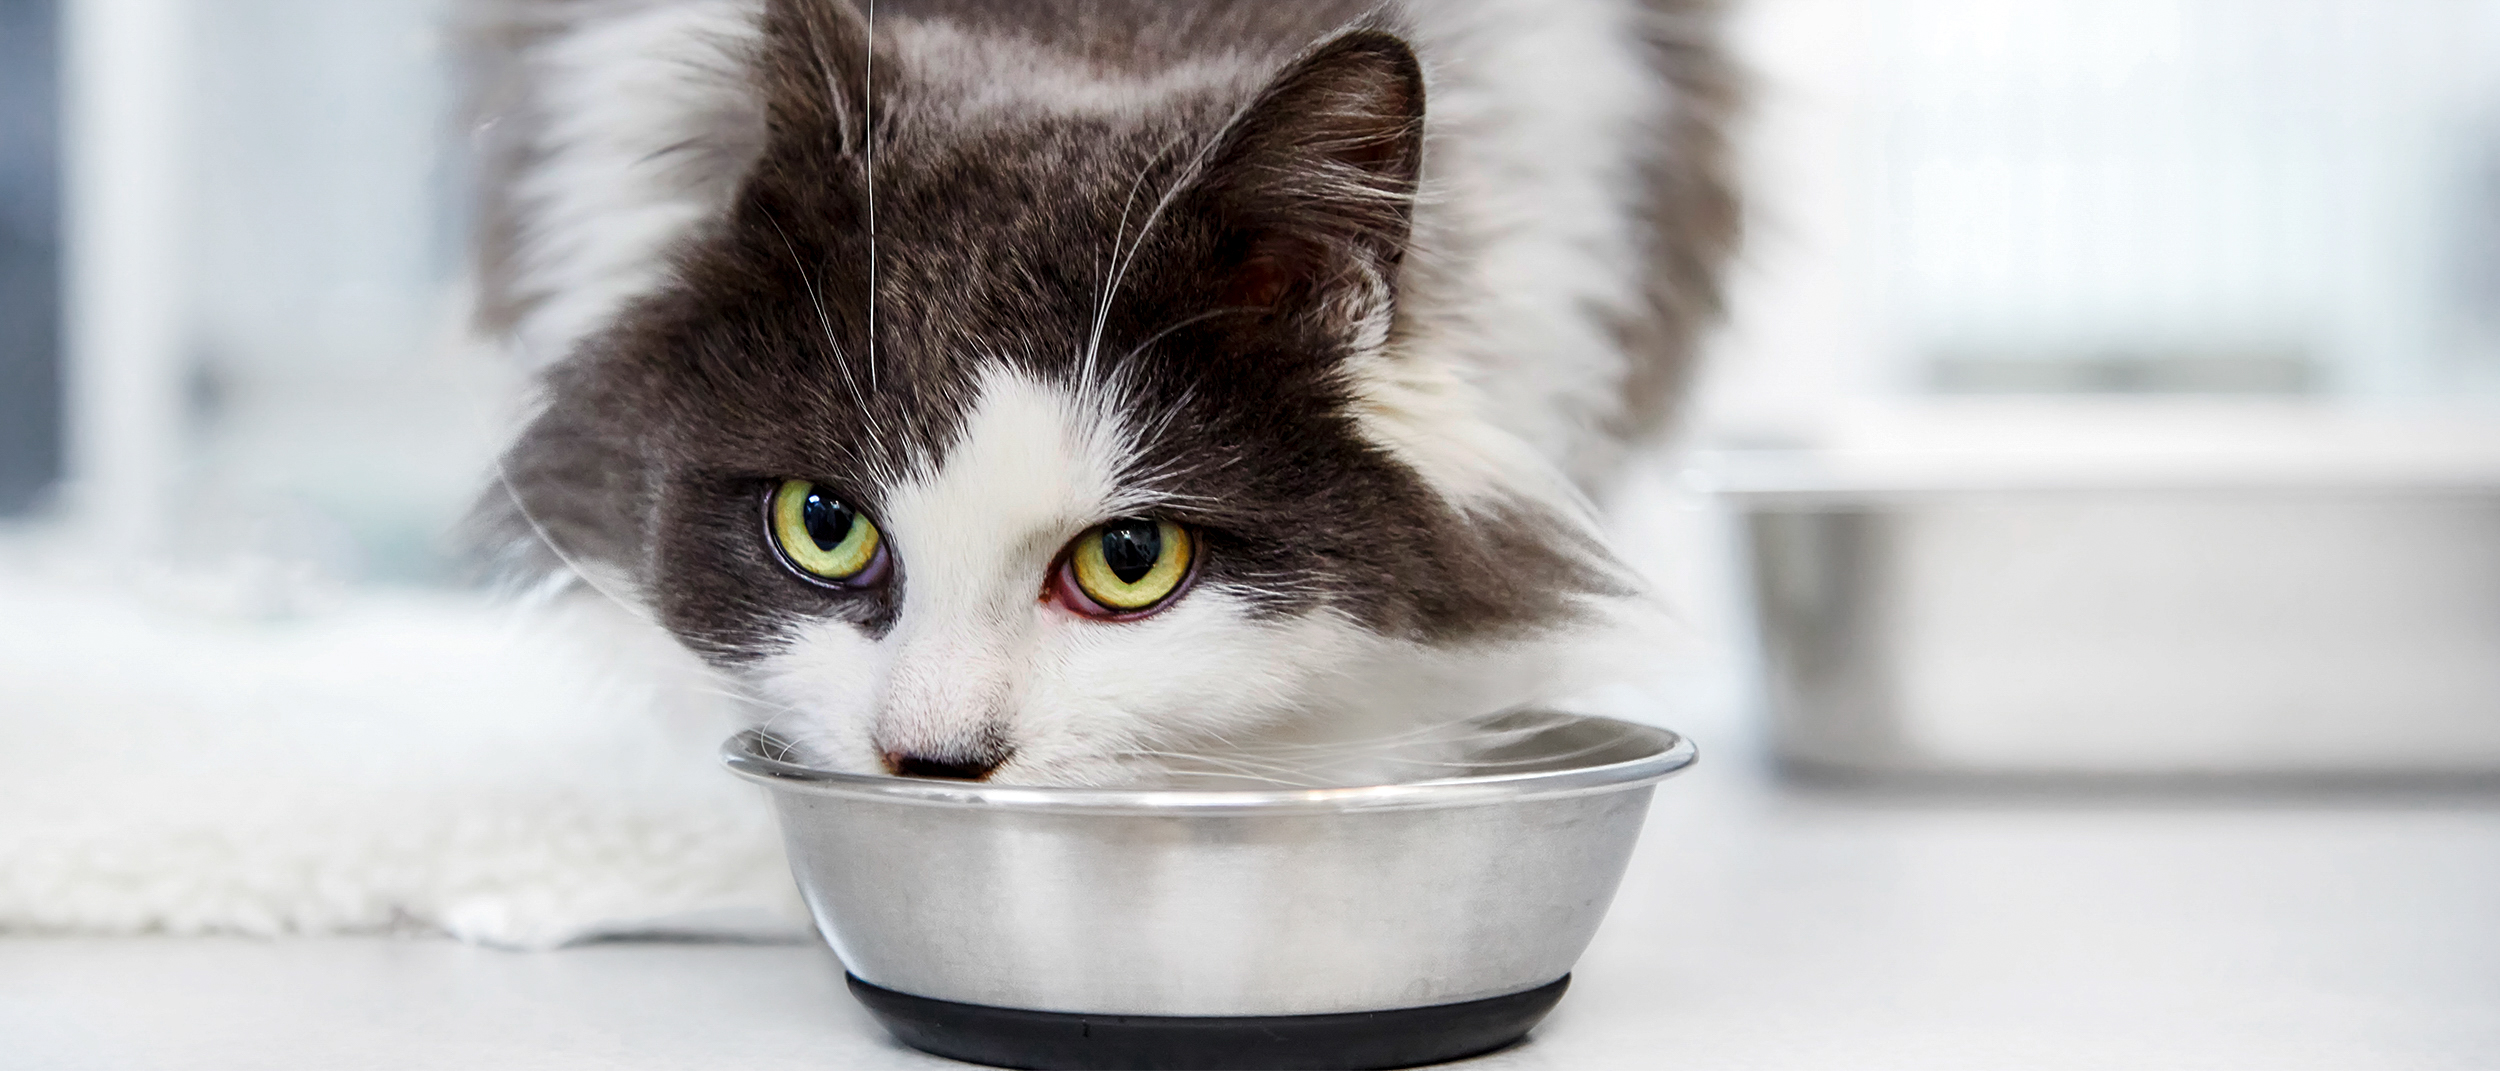 Adult cat standing in a vets office eating from a silver bowl.